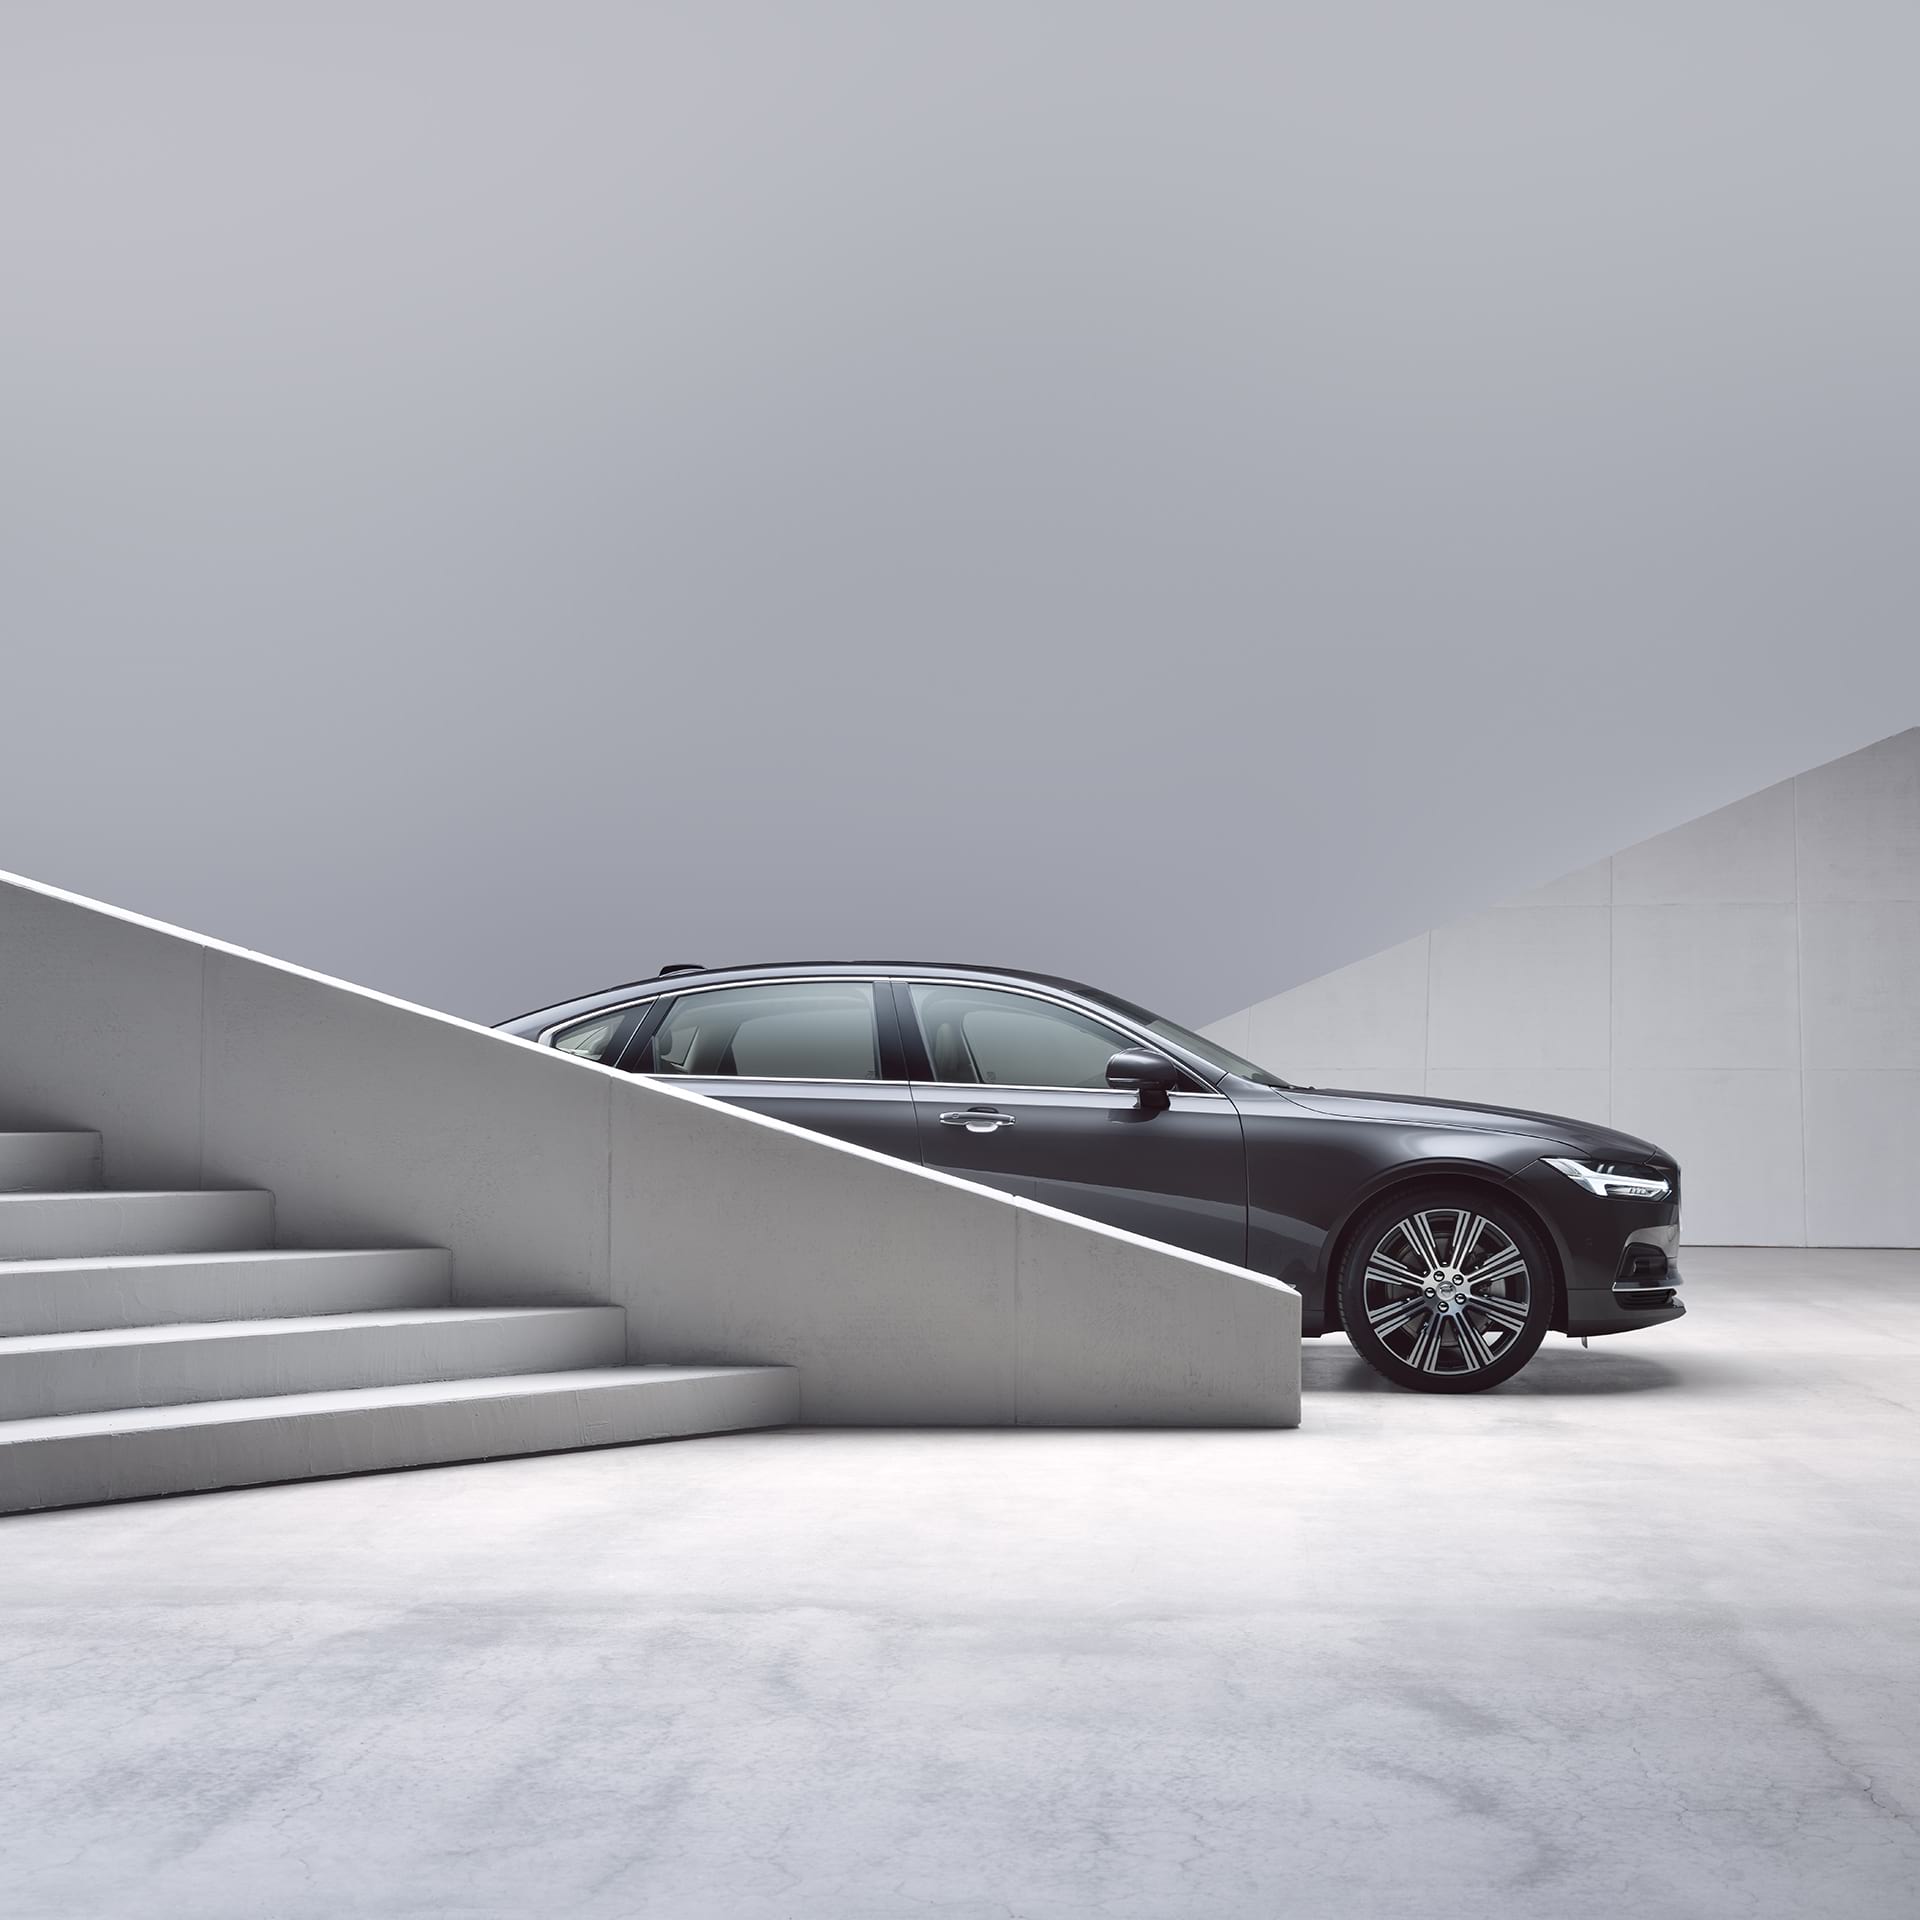 A Volvo S90 partially obscured by stairs